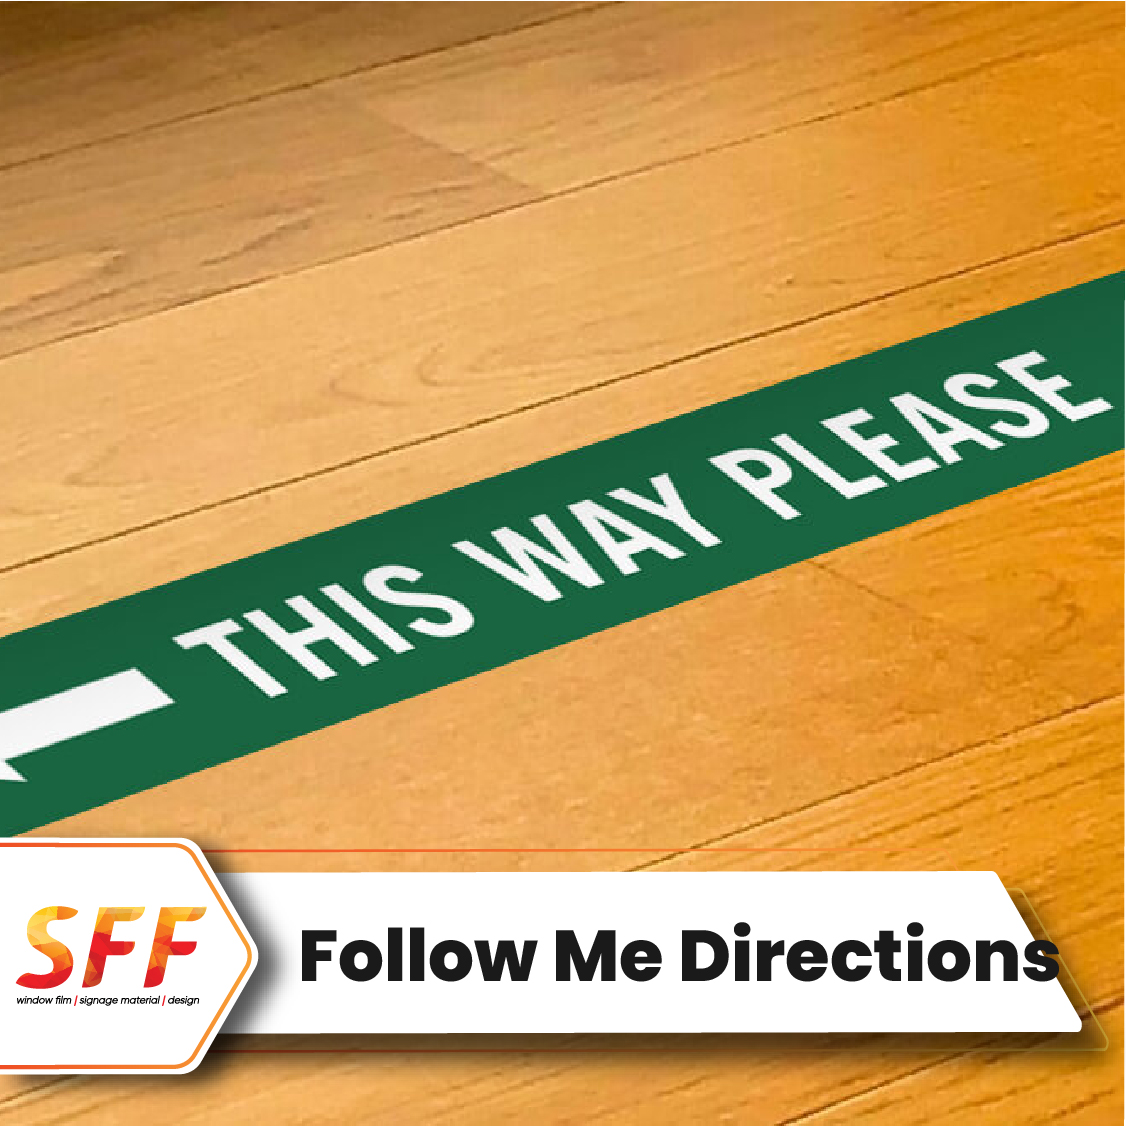 Follow Me Directions